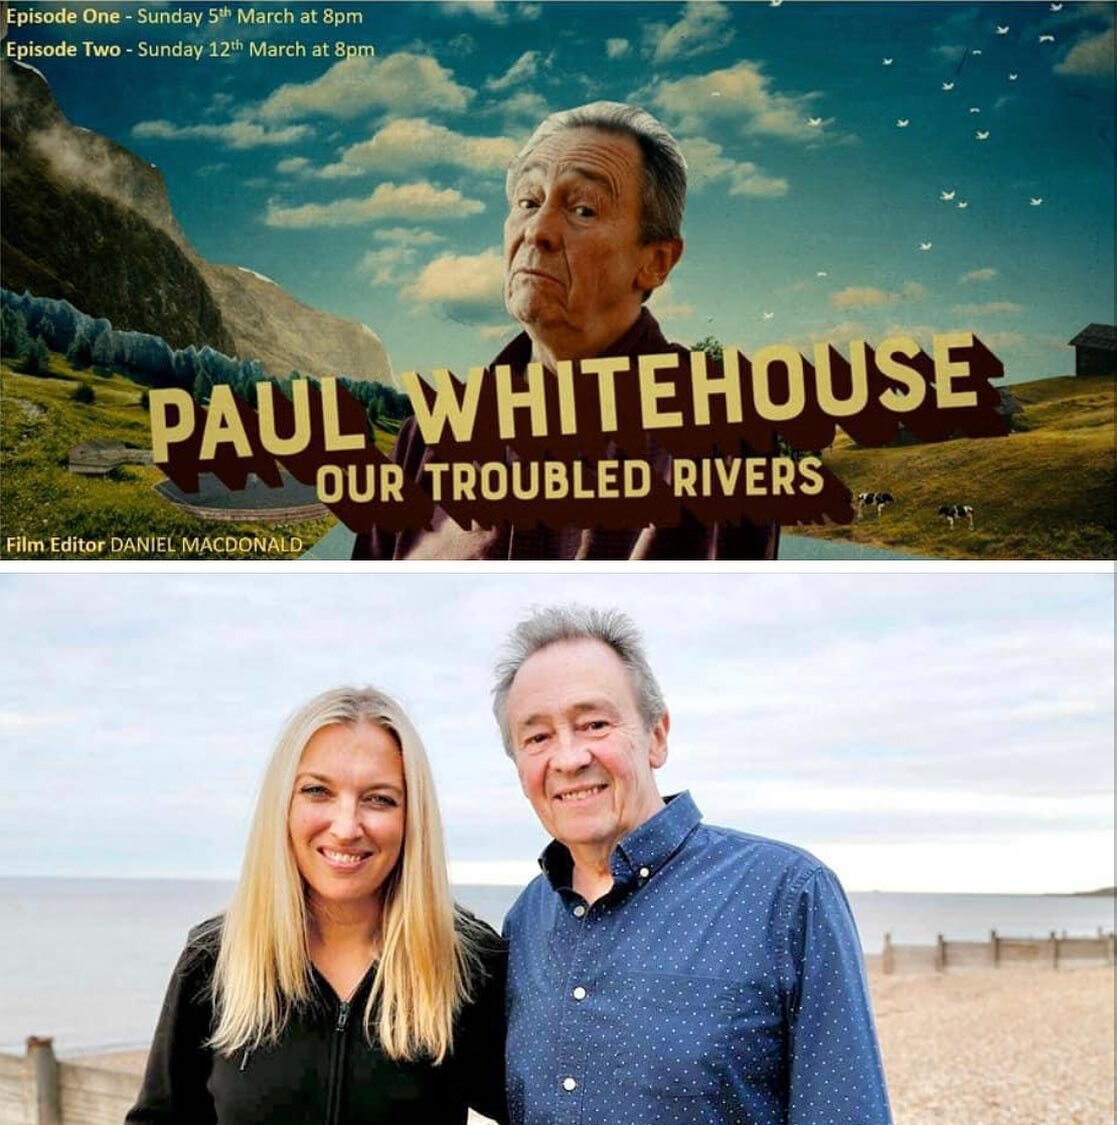 So&hellip;what&rsquo;s everyone&rsquo;s thoughts on the programme? Let us know below. 
.
.
.
#tankerton #whitstable #kentcoast #kent #sewagepollution #sewage #seaswimming #bbc2 #paulwhitehouse #fishing #openwaterswimming #beaver #fishinglife #fishing